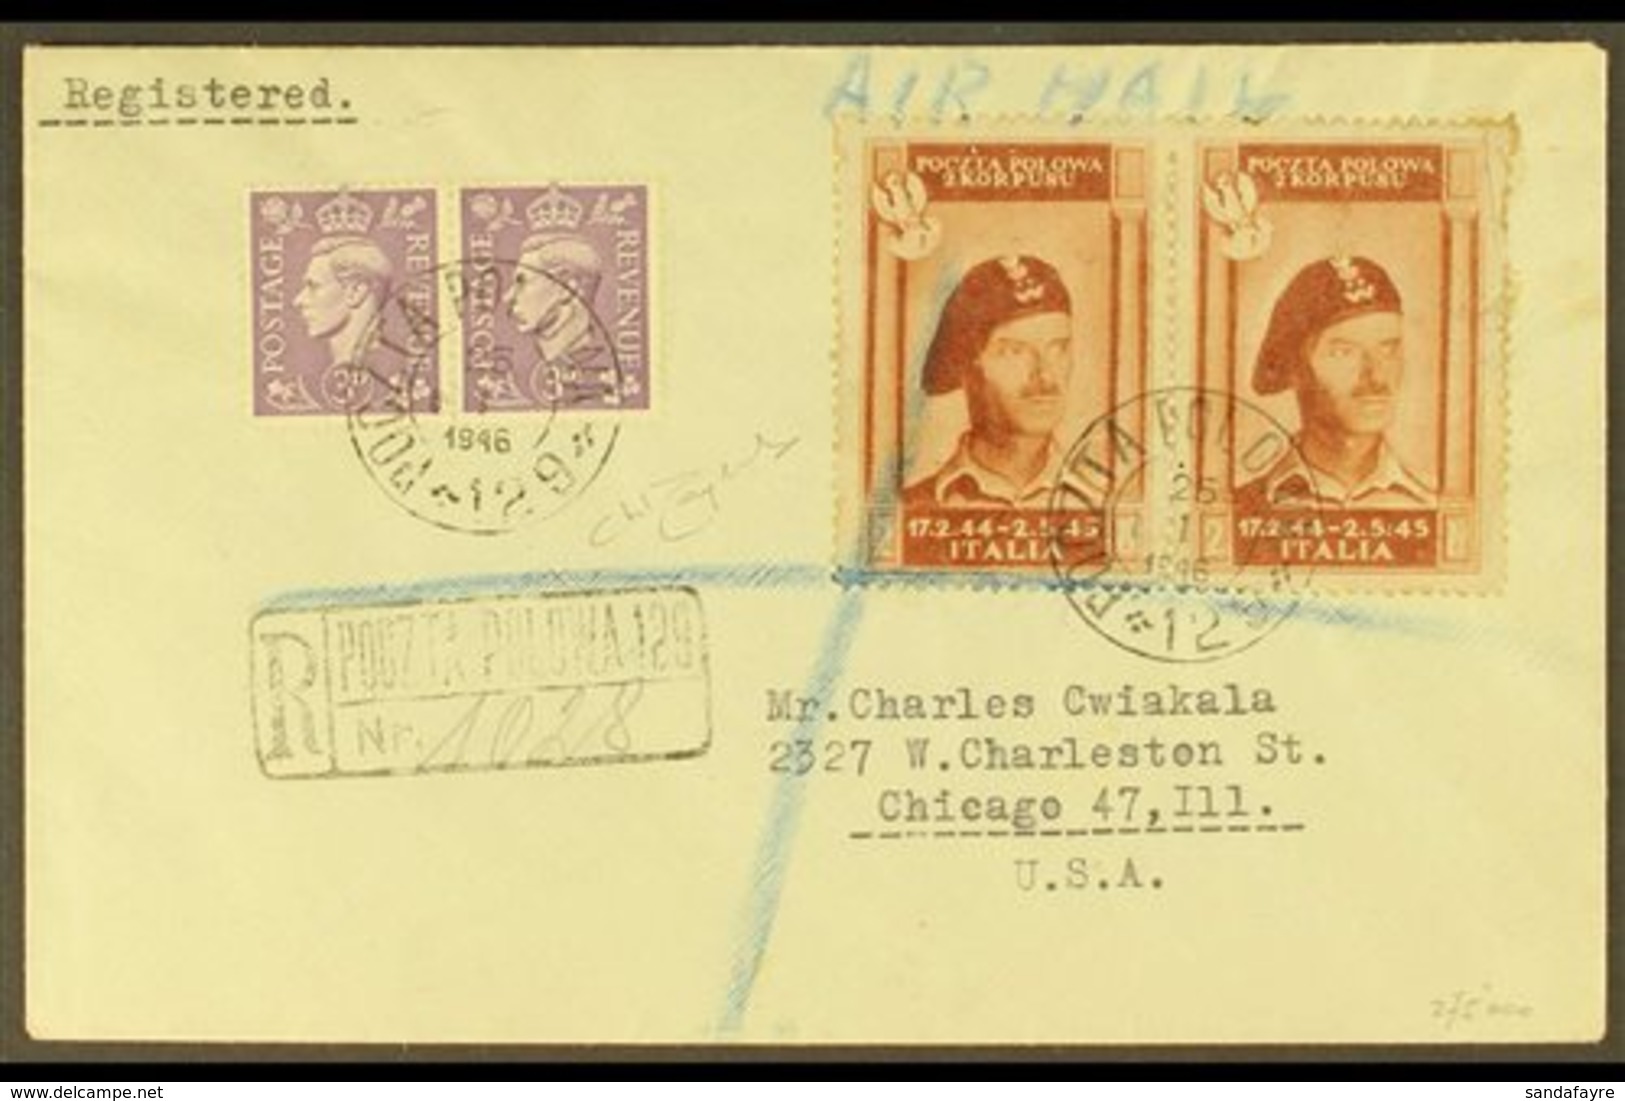 \Y POLISH CORPS\Y 1946 Registered Cover To Chicago Franked GB 3d Lilac Plus Polish Corps 2z Red Brown Pair, Sass 4, With - Unclassified